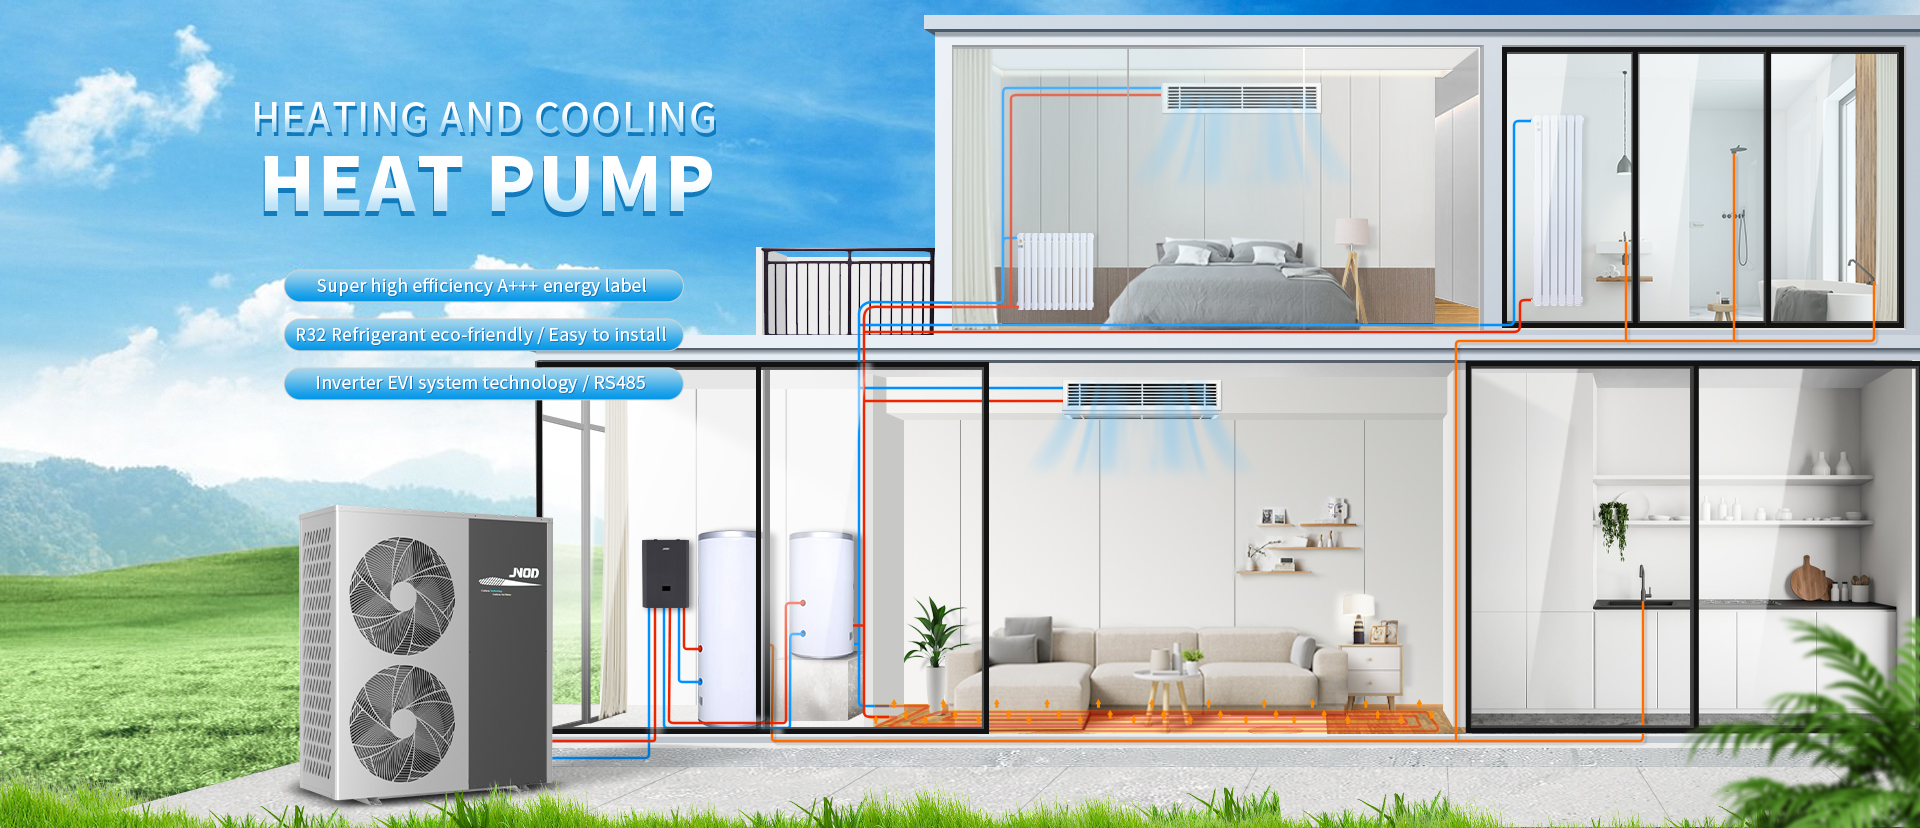 Monoblock Heating And Cooling Heat Pump